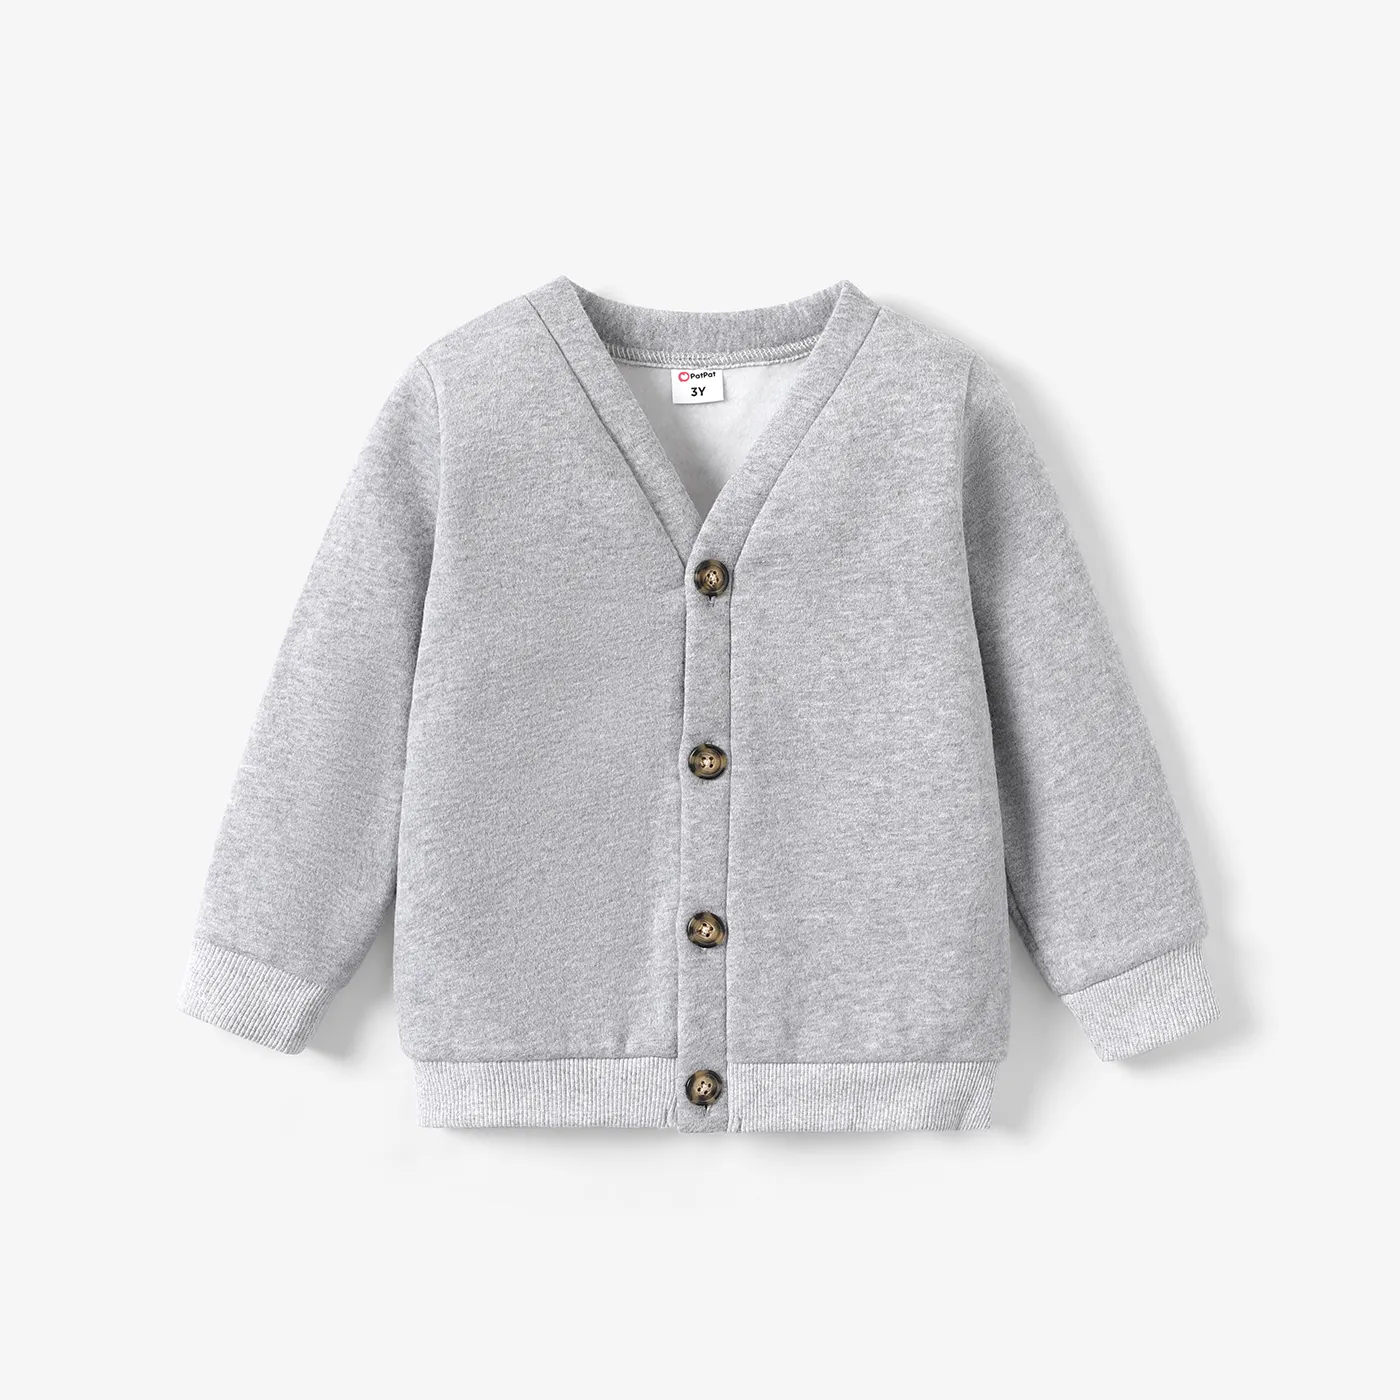 Toddler Boy Solid Color Knit Cardigan Coats/Jackets